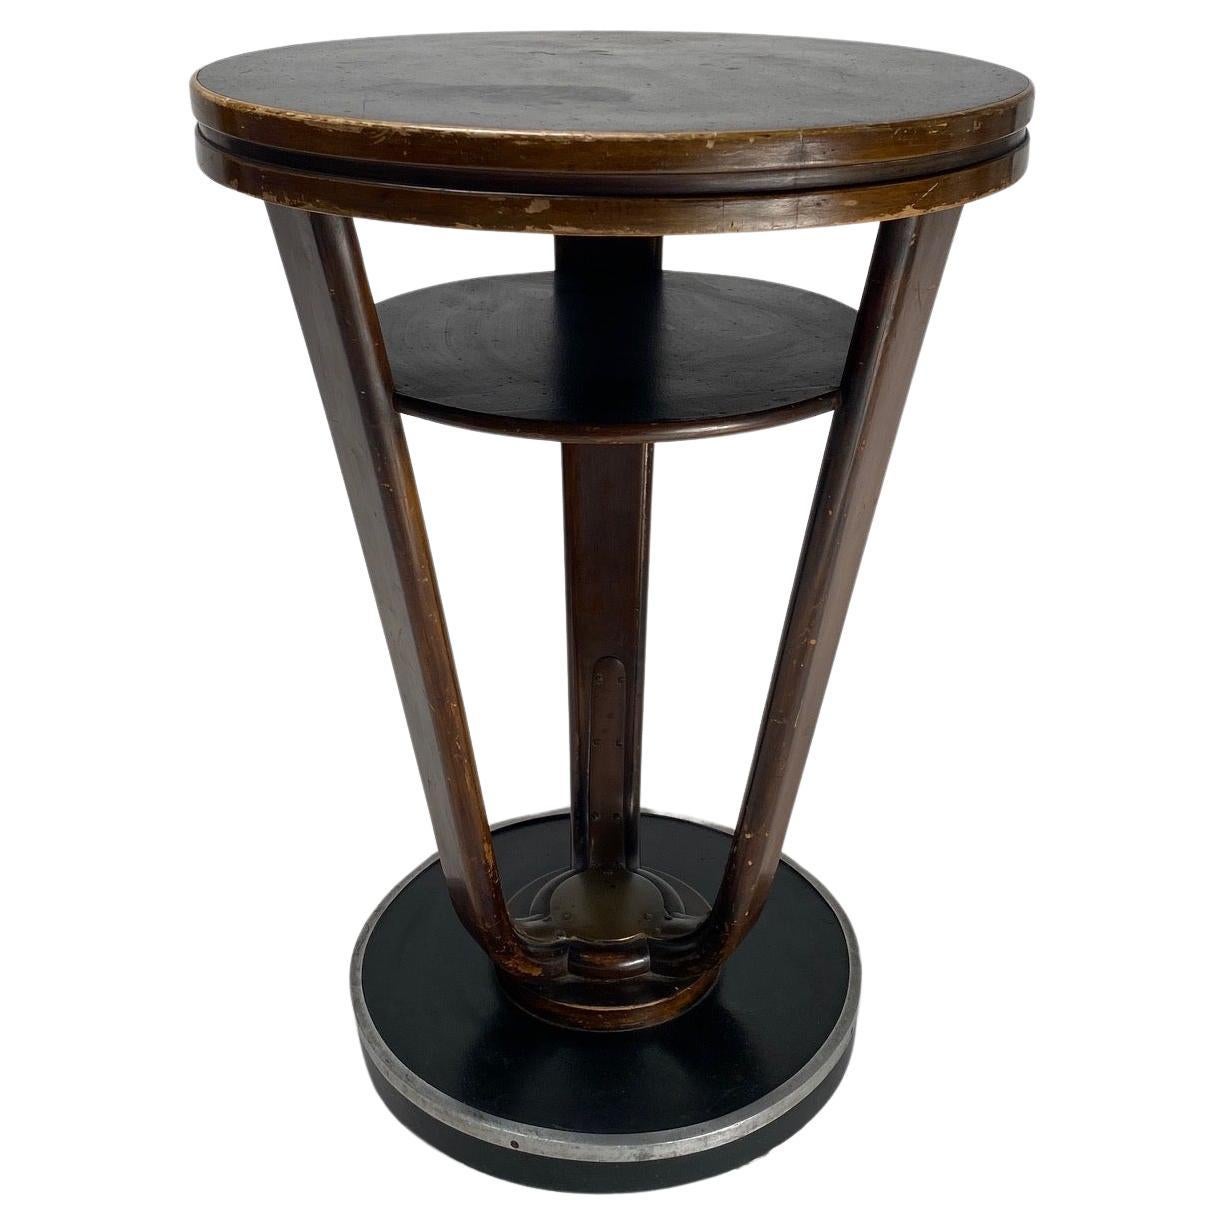 Art Deco round table in wood and metal, Italy, 1930s